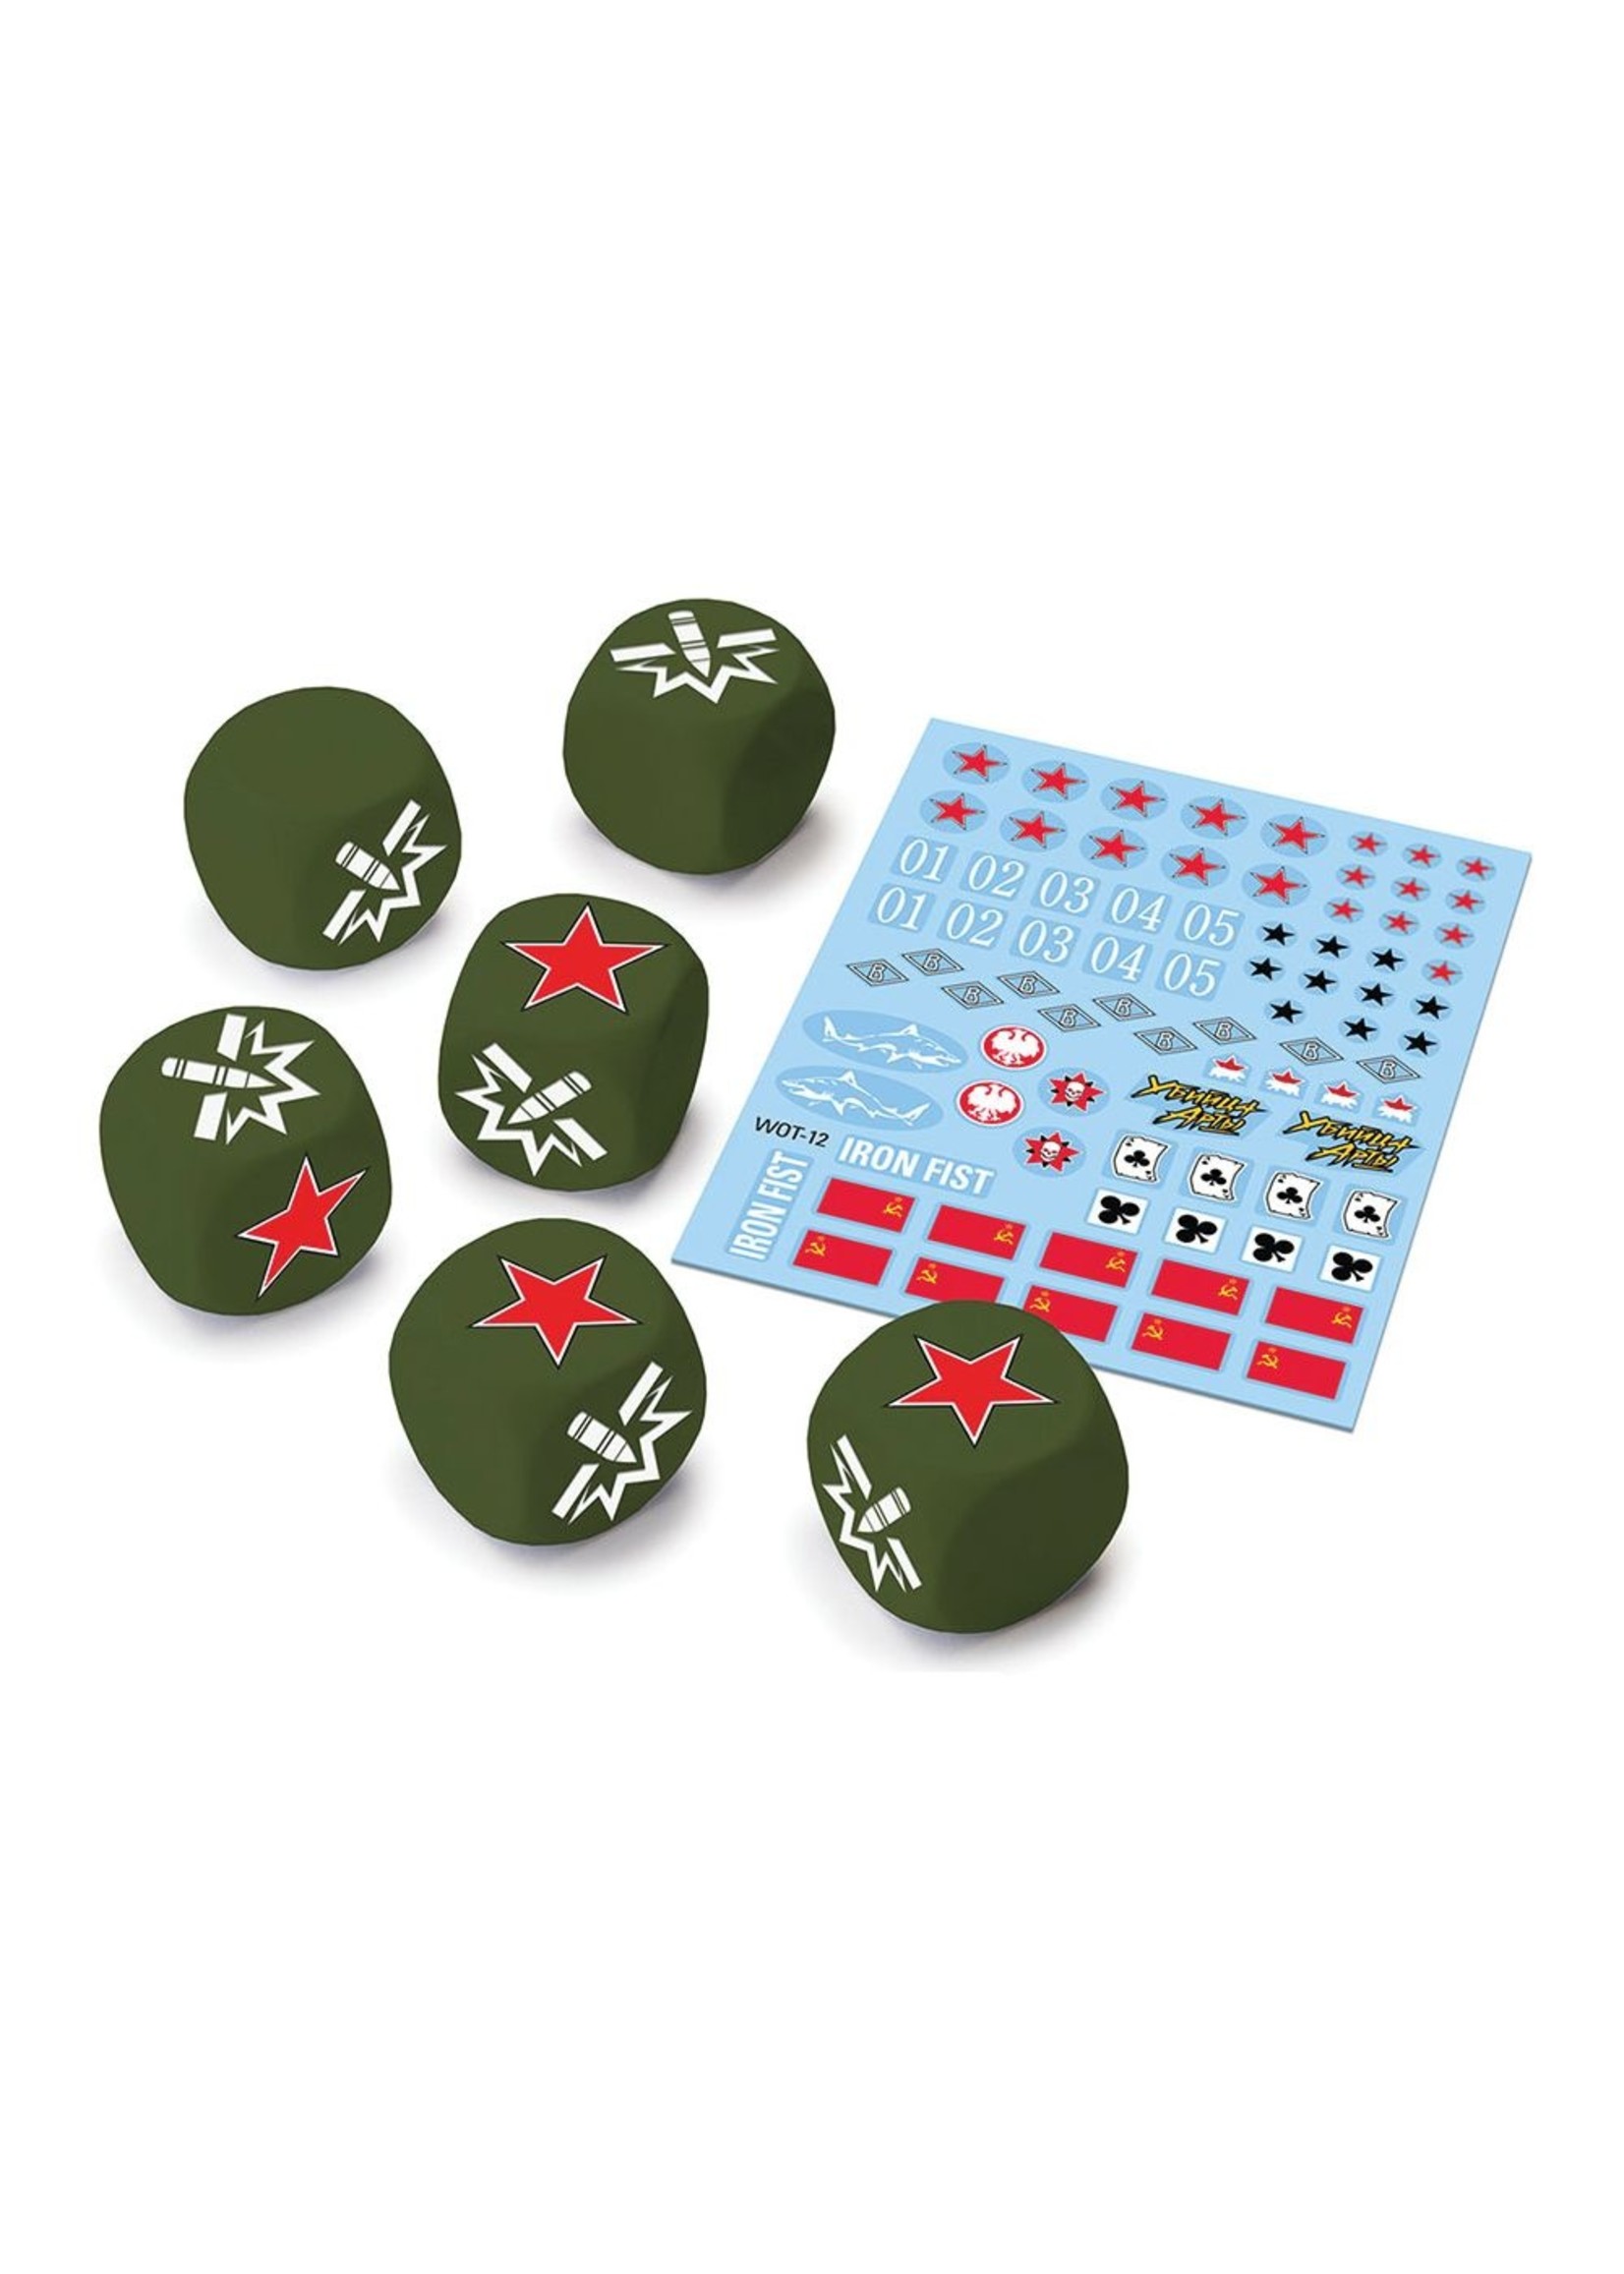 World Of Tanks World of Tanks: Miniatures Game - Soviet Upgrade Pack Dice (6) & Decal (1)